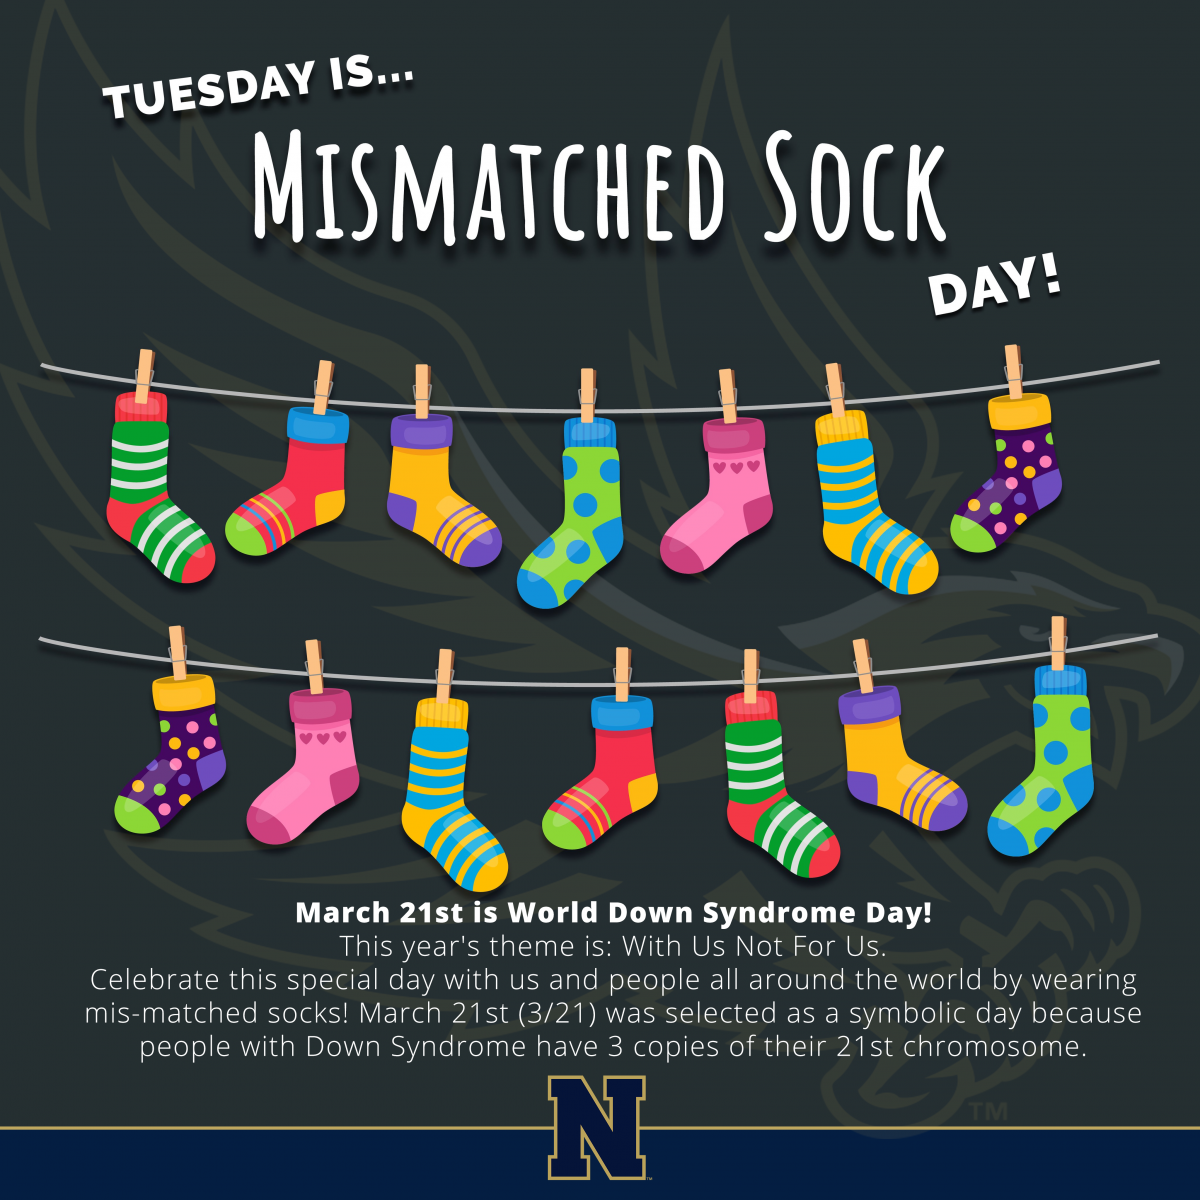 Wear Mismatched Socks for World Down Syndrome Day! Vails Gate STEAM